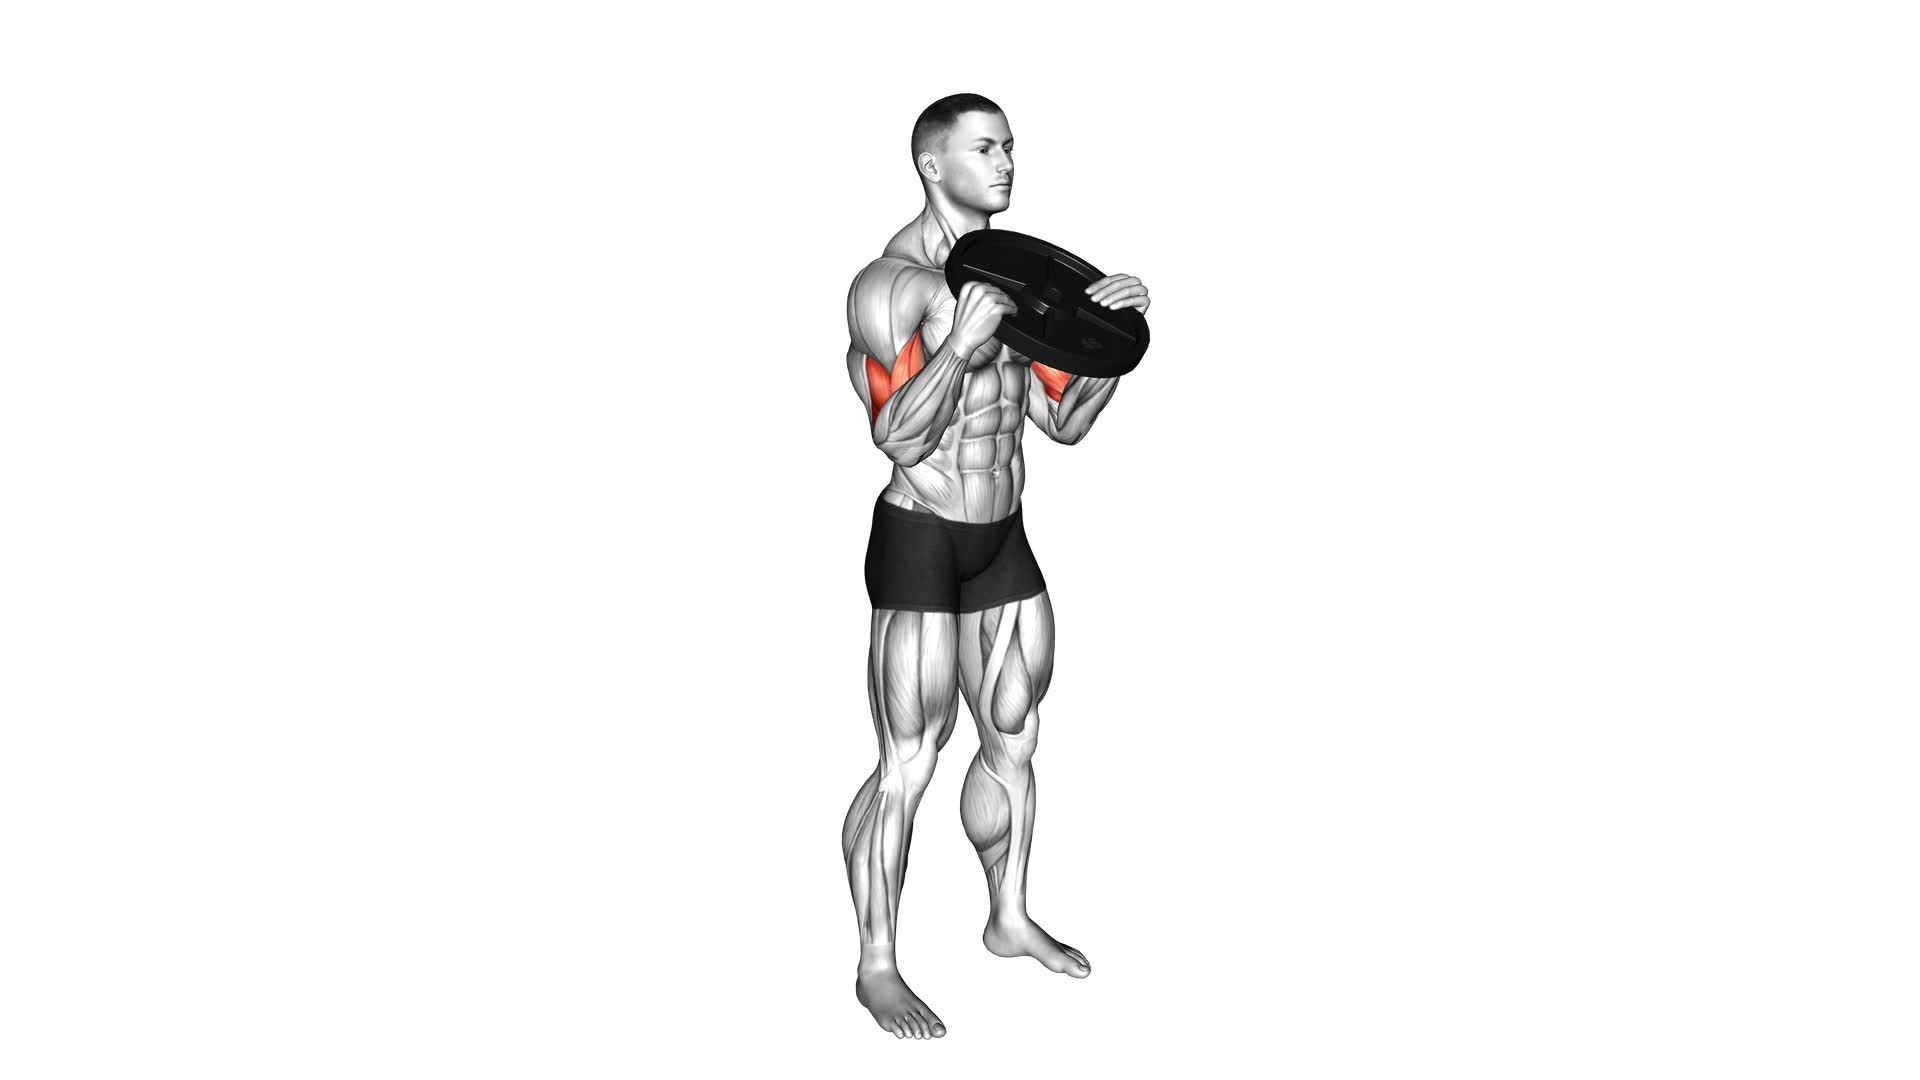 Weighted Plate Standing Biceps Curl (male) - Video Exercise Guide & Tips